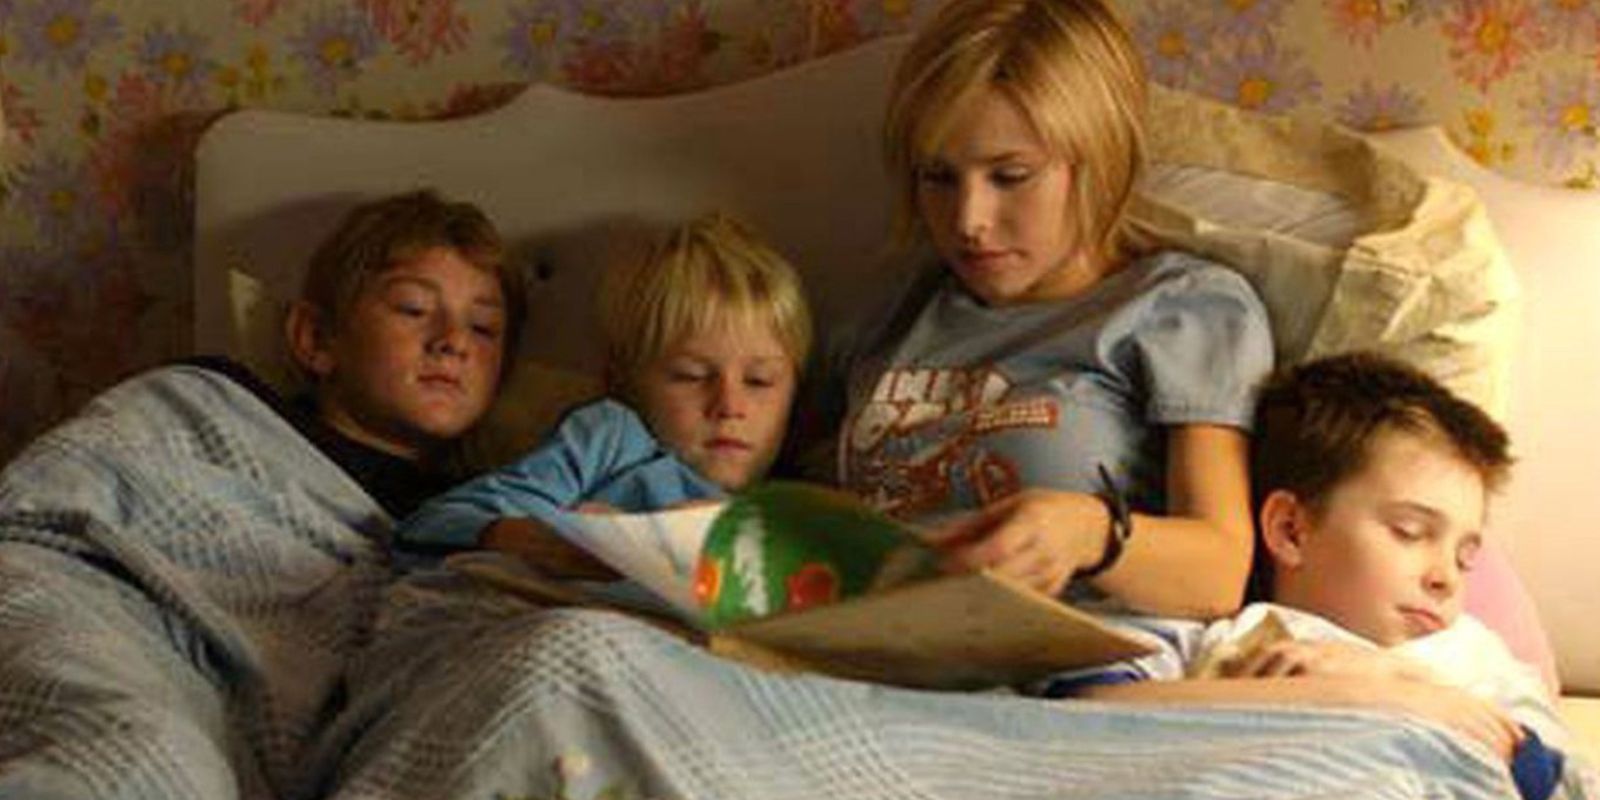 Gracie reading to her brothers in bed